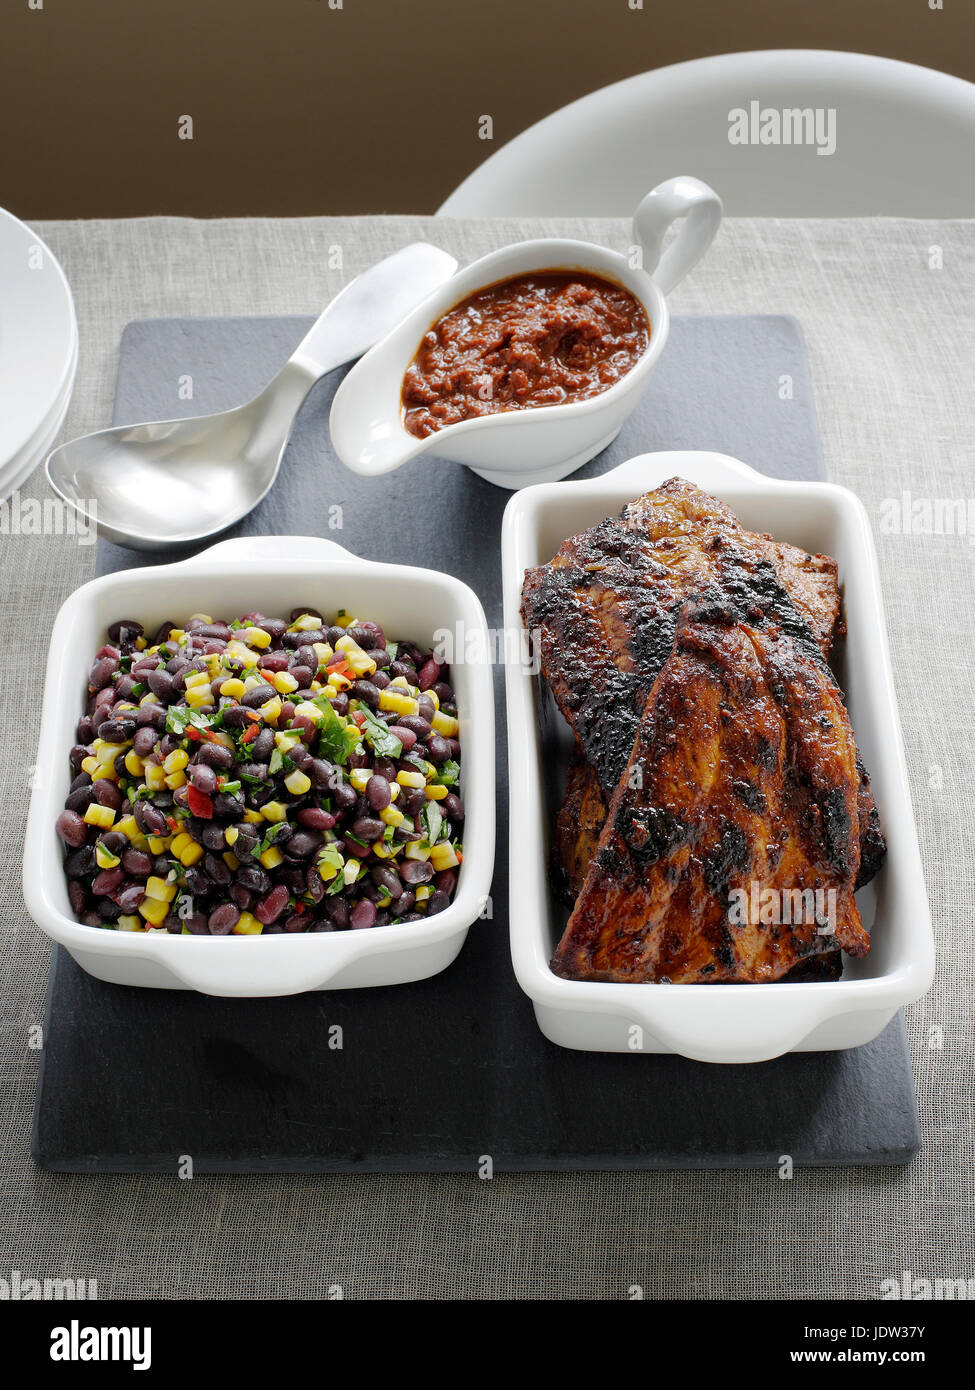 Dishes of pork ribs and black bean salad Stock Photo